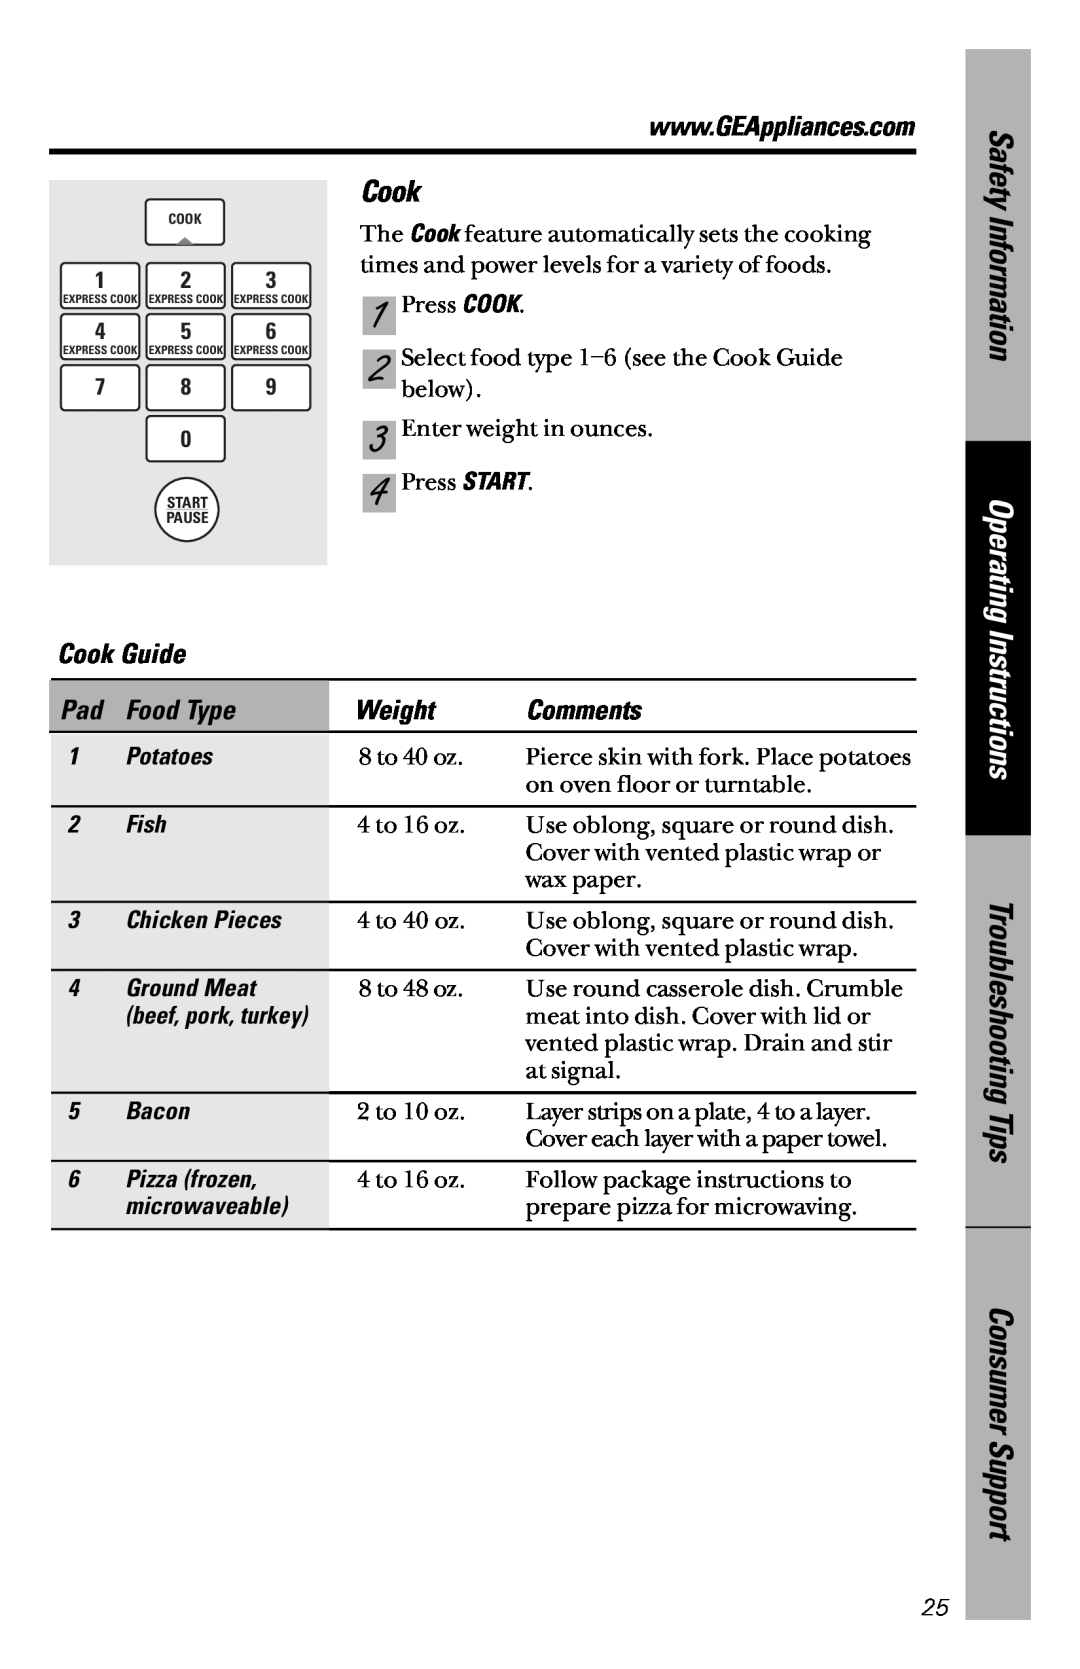 GE JVM1841 Operating, Information, Instructions, Troubleshooting Tips, Consumer Support, Cook Guide, Food Type, Weight 